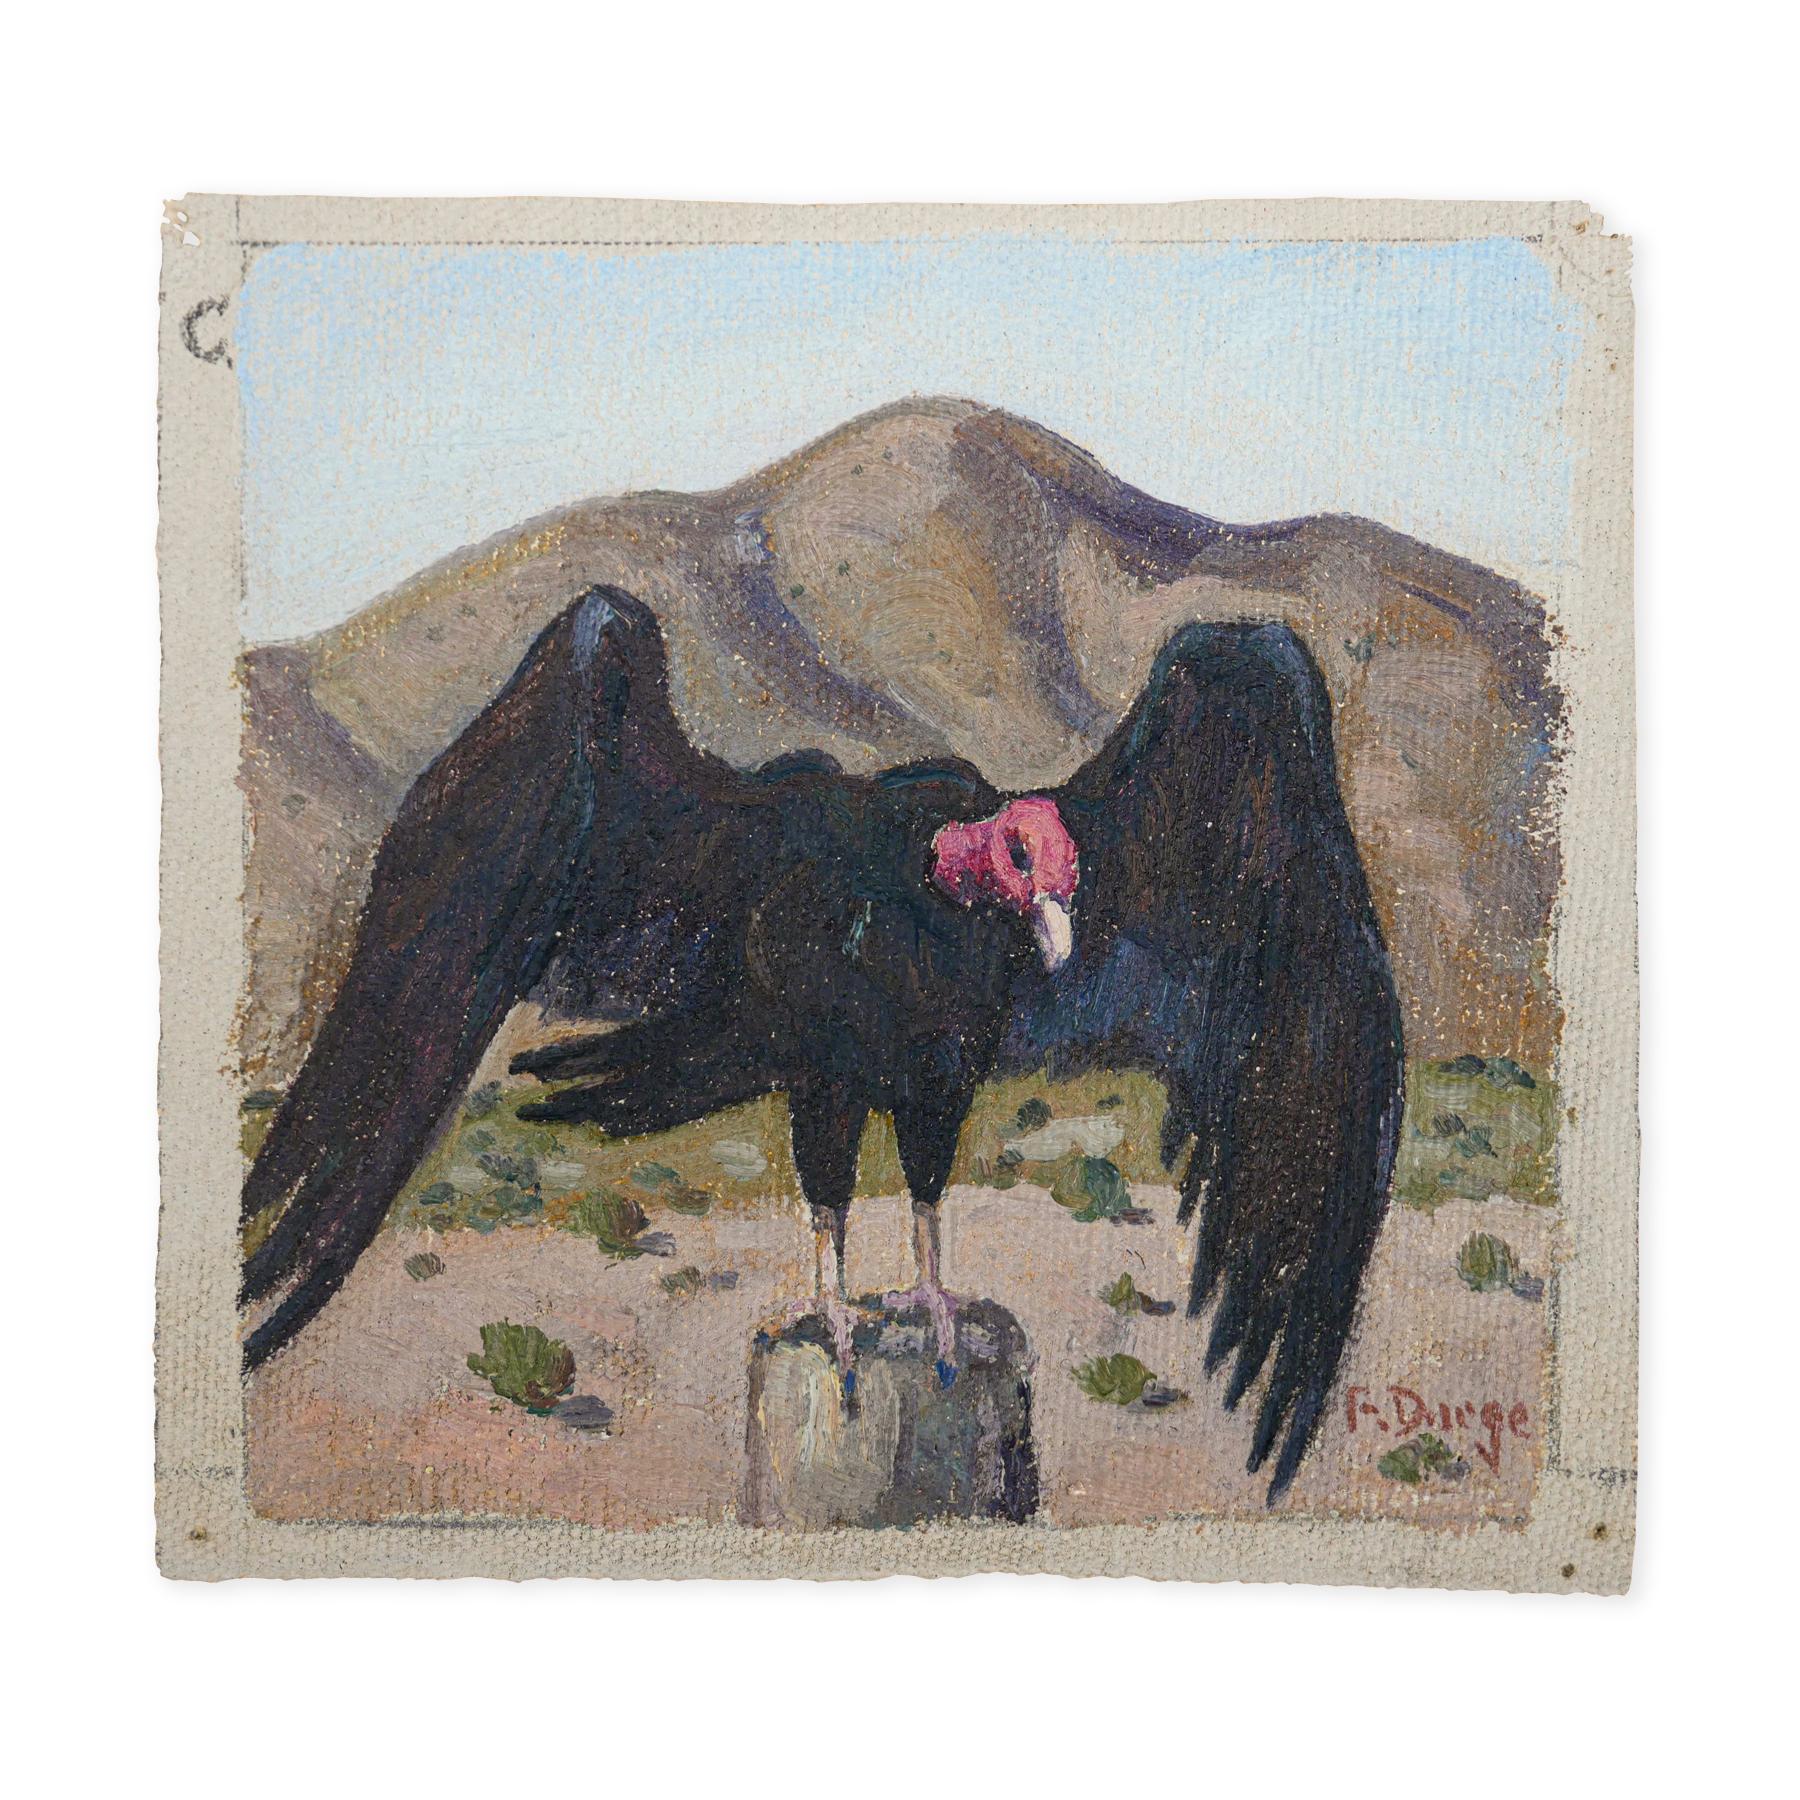 Black, tan, red, and sky blue abstract impressionist animal painting by Texas artist Fred Darge. The painting depicts a large vulture in a desert perched on a rock. Signed by the artist at the bottom right corner. Unstretched and unframed but